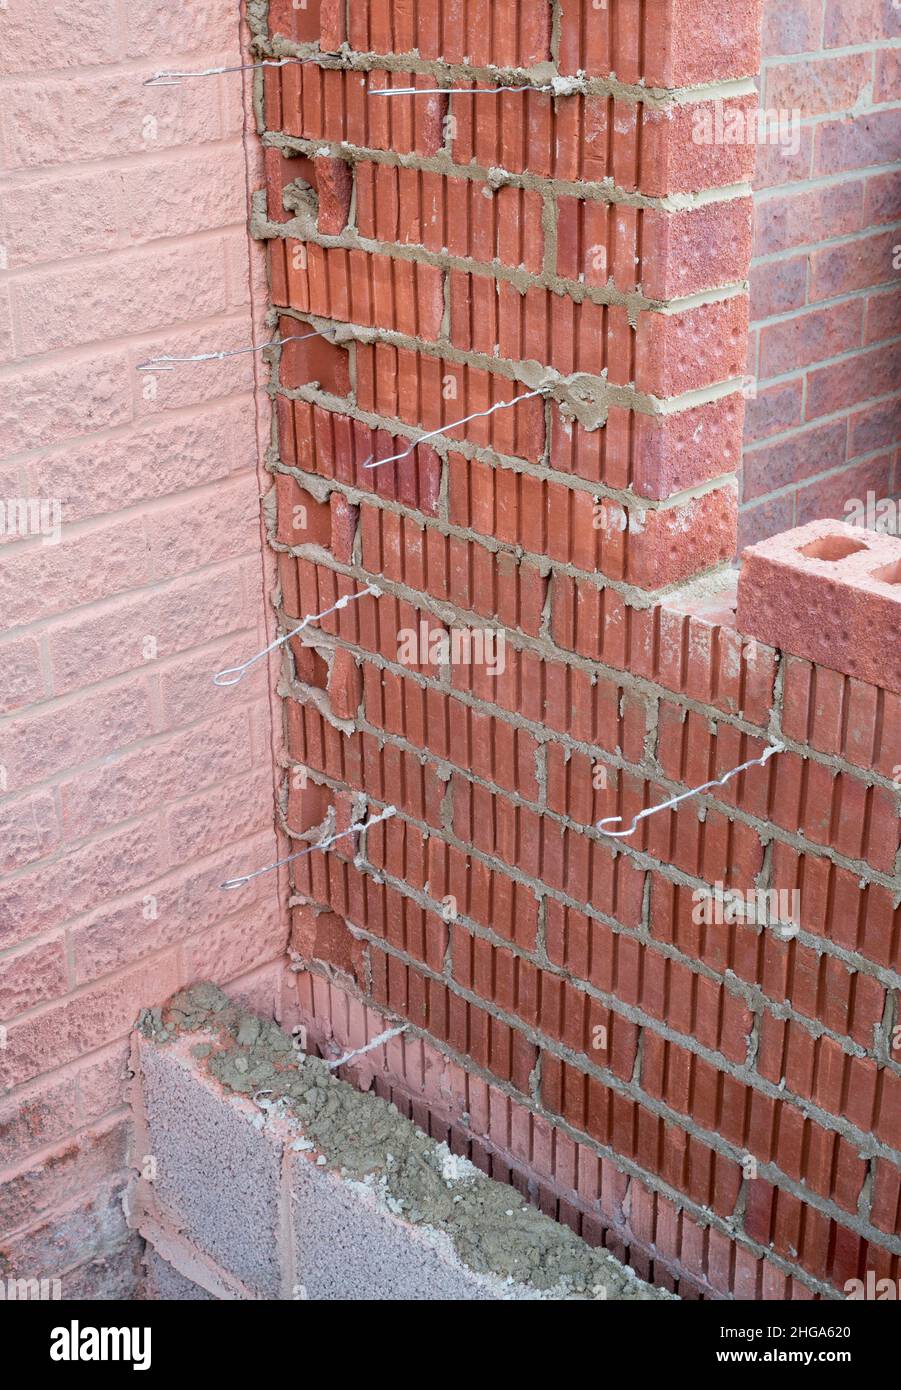 A cavity wall under construction showing metal brick or wall ties in position Stock Photo